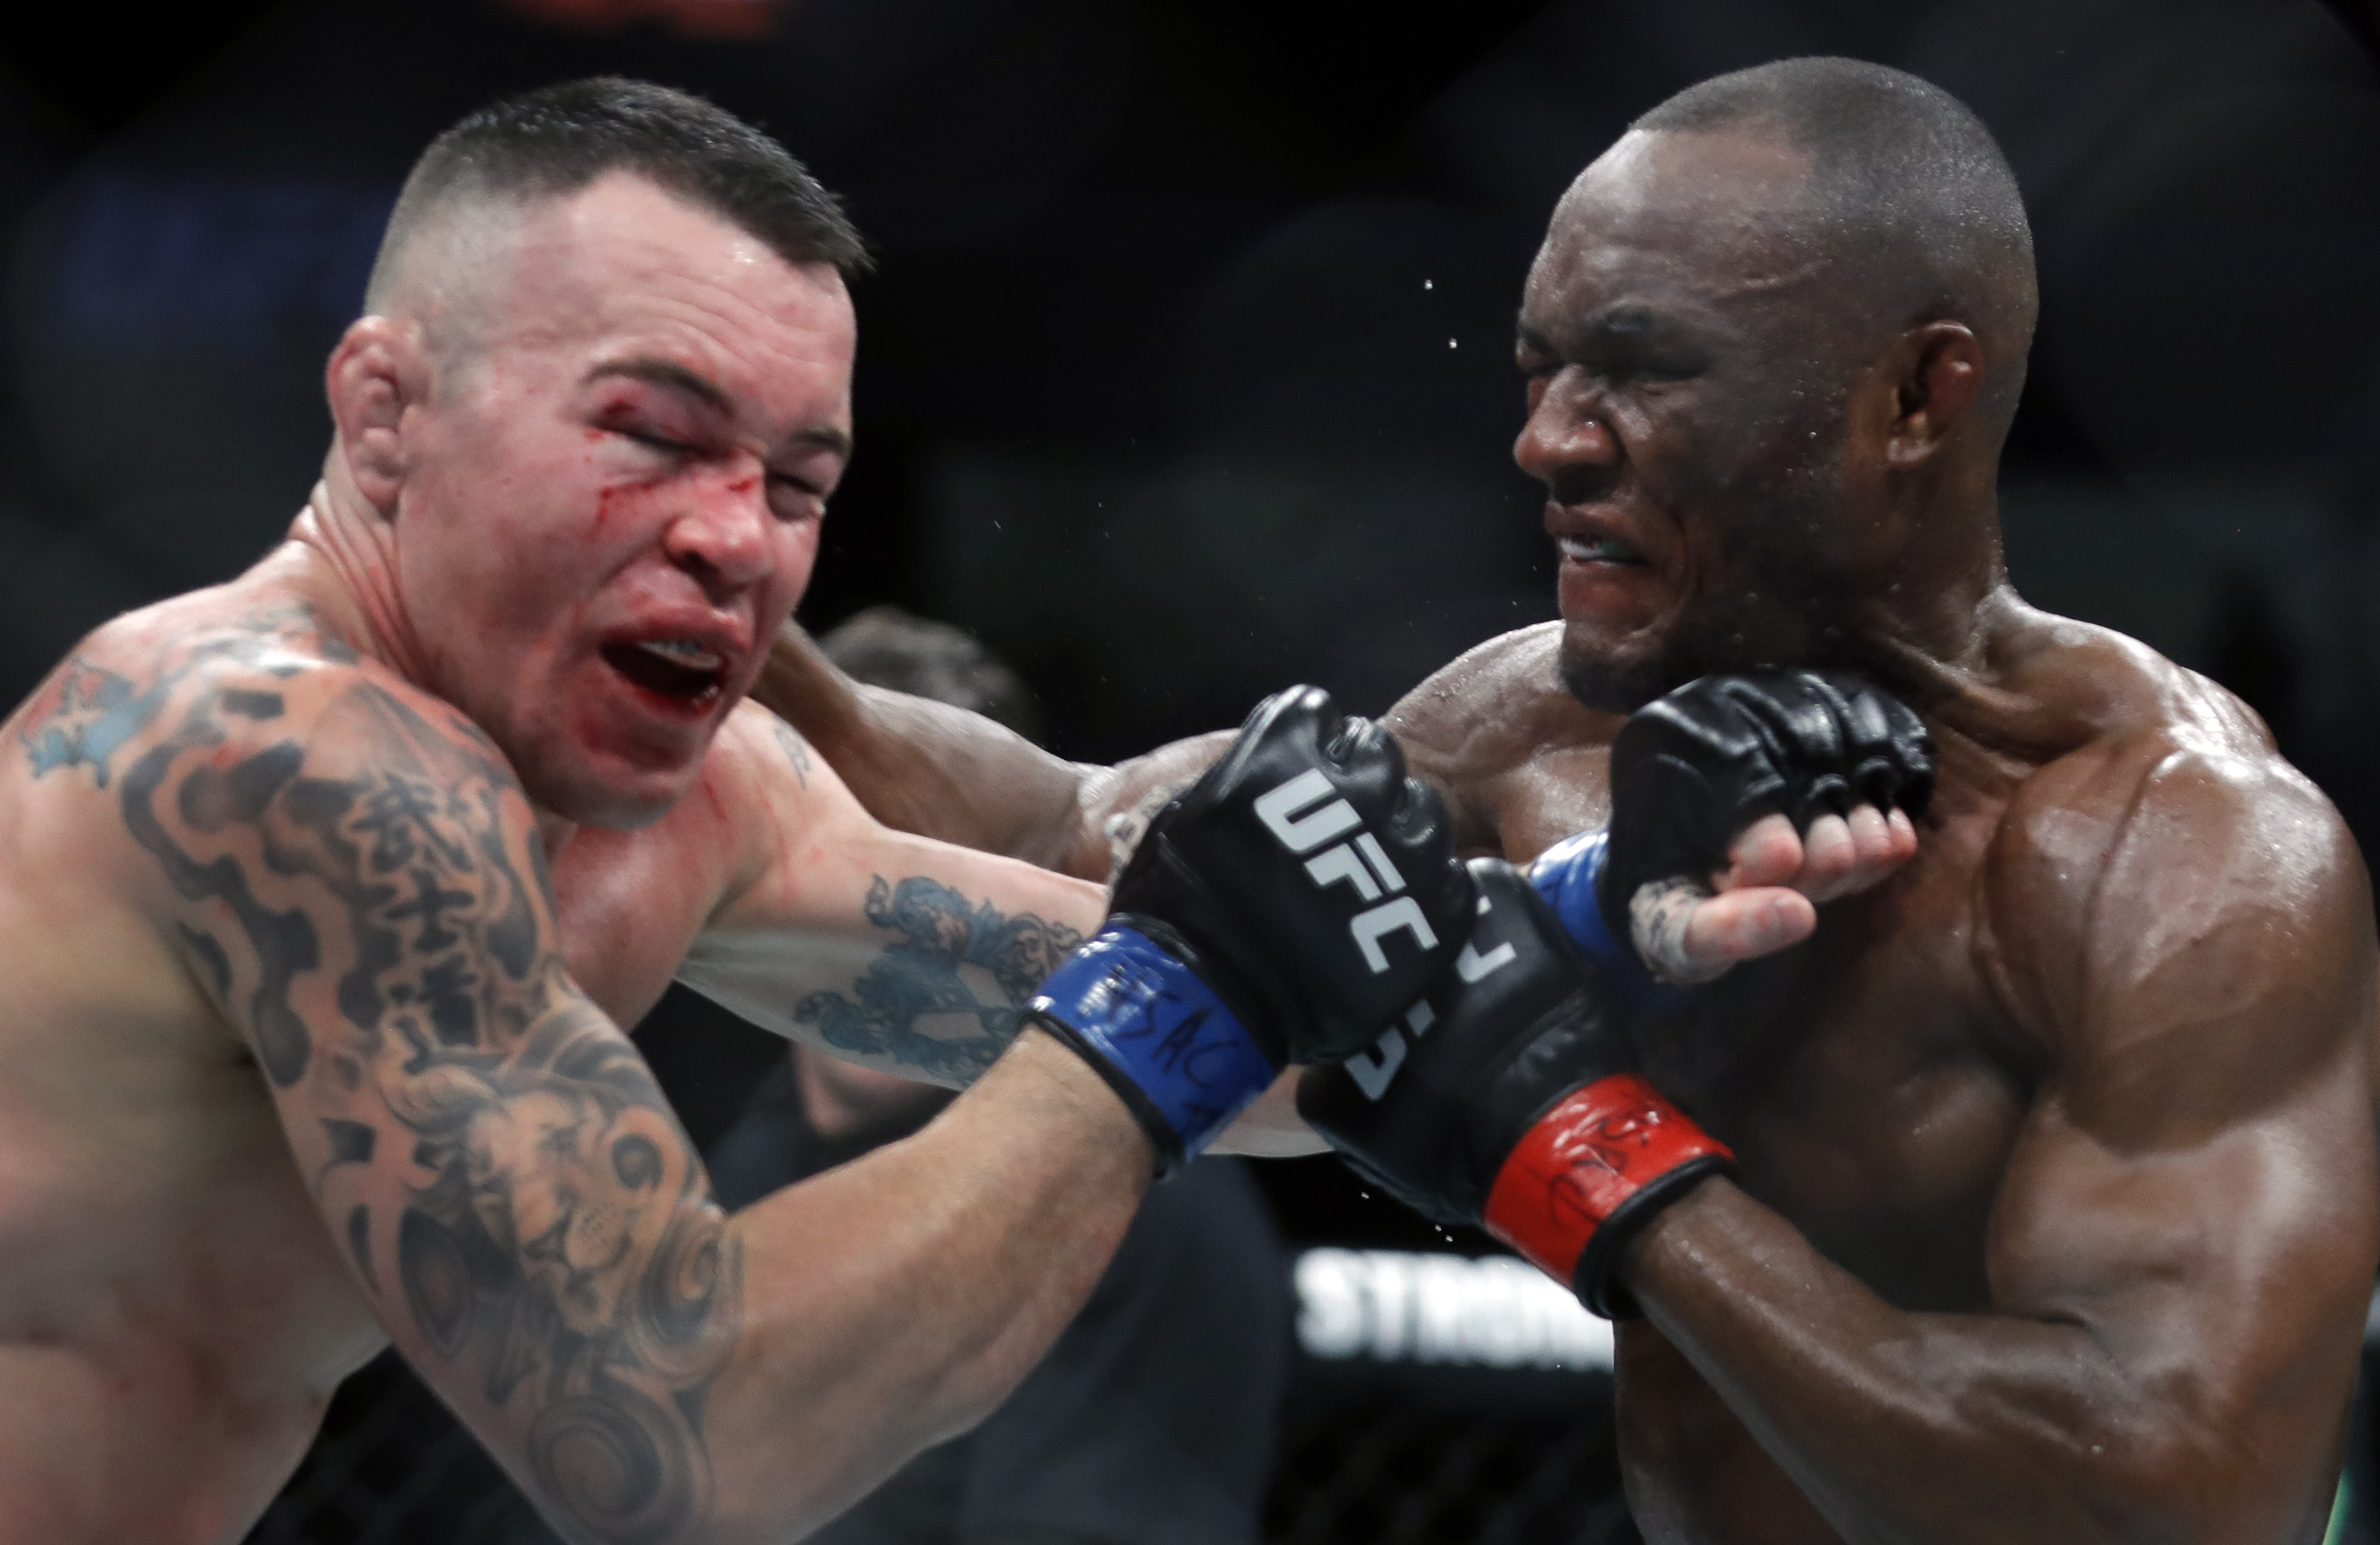 UFC's Colby Covington Erupts: 'You Can't Win' | Heavy.com